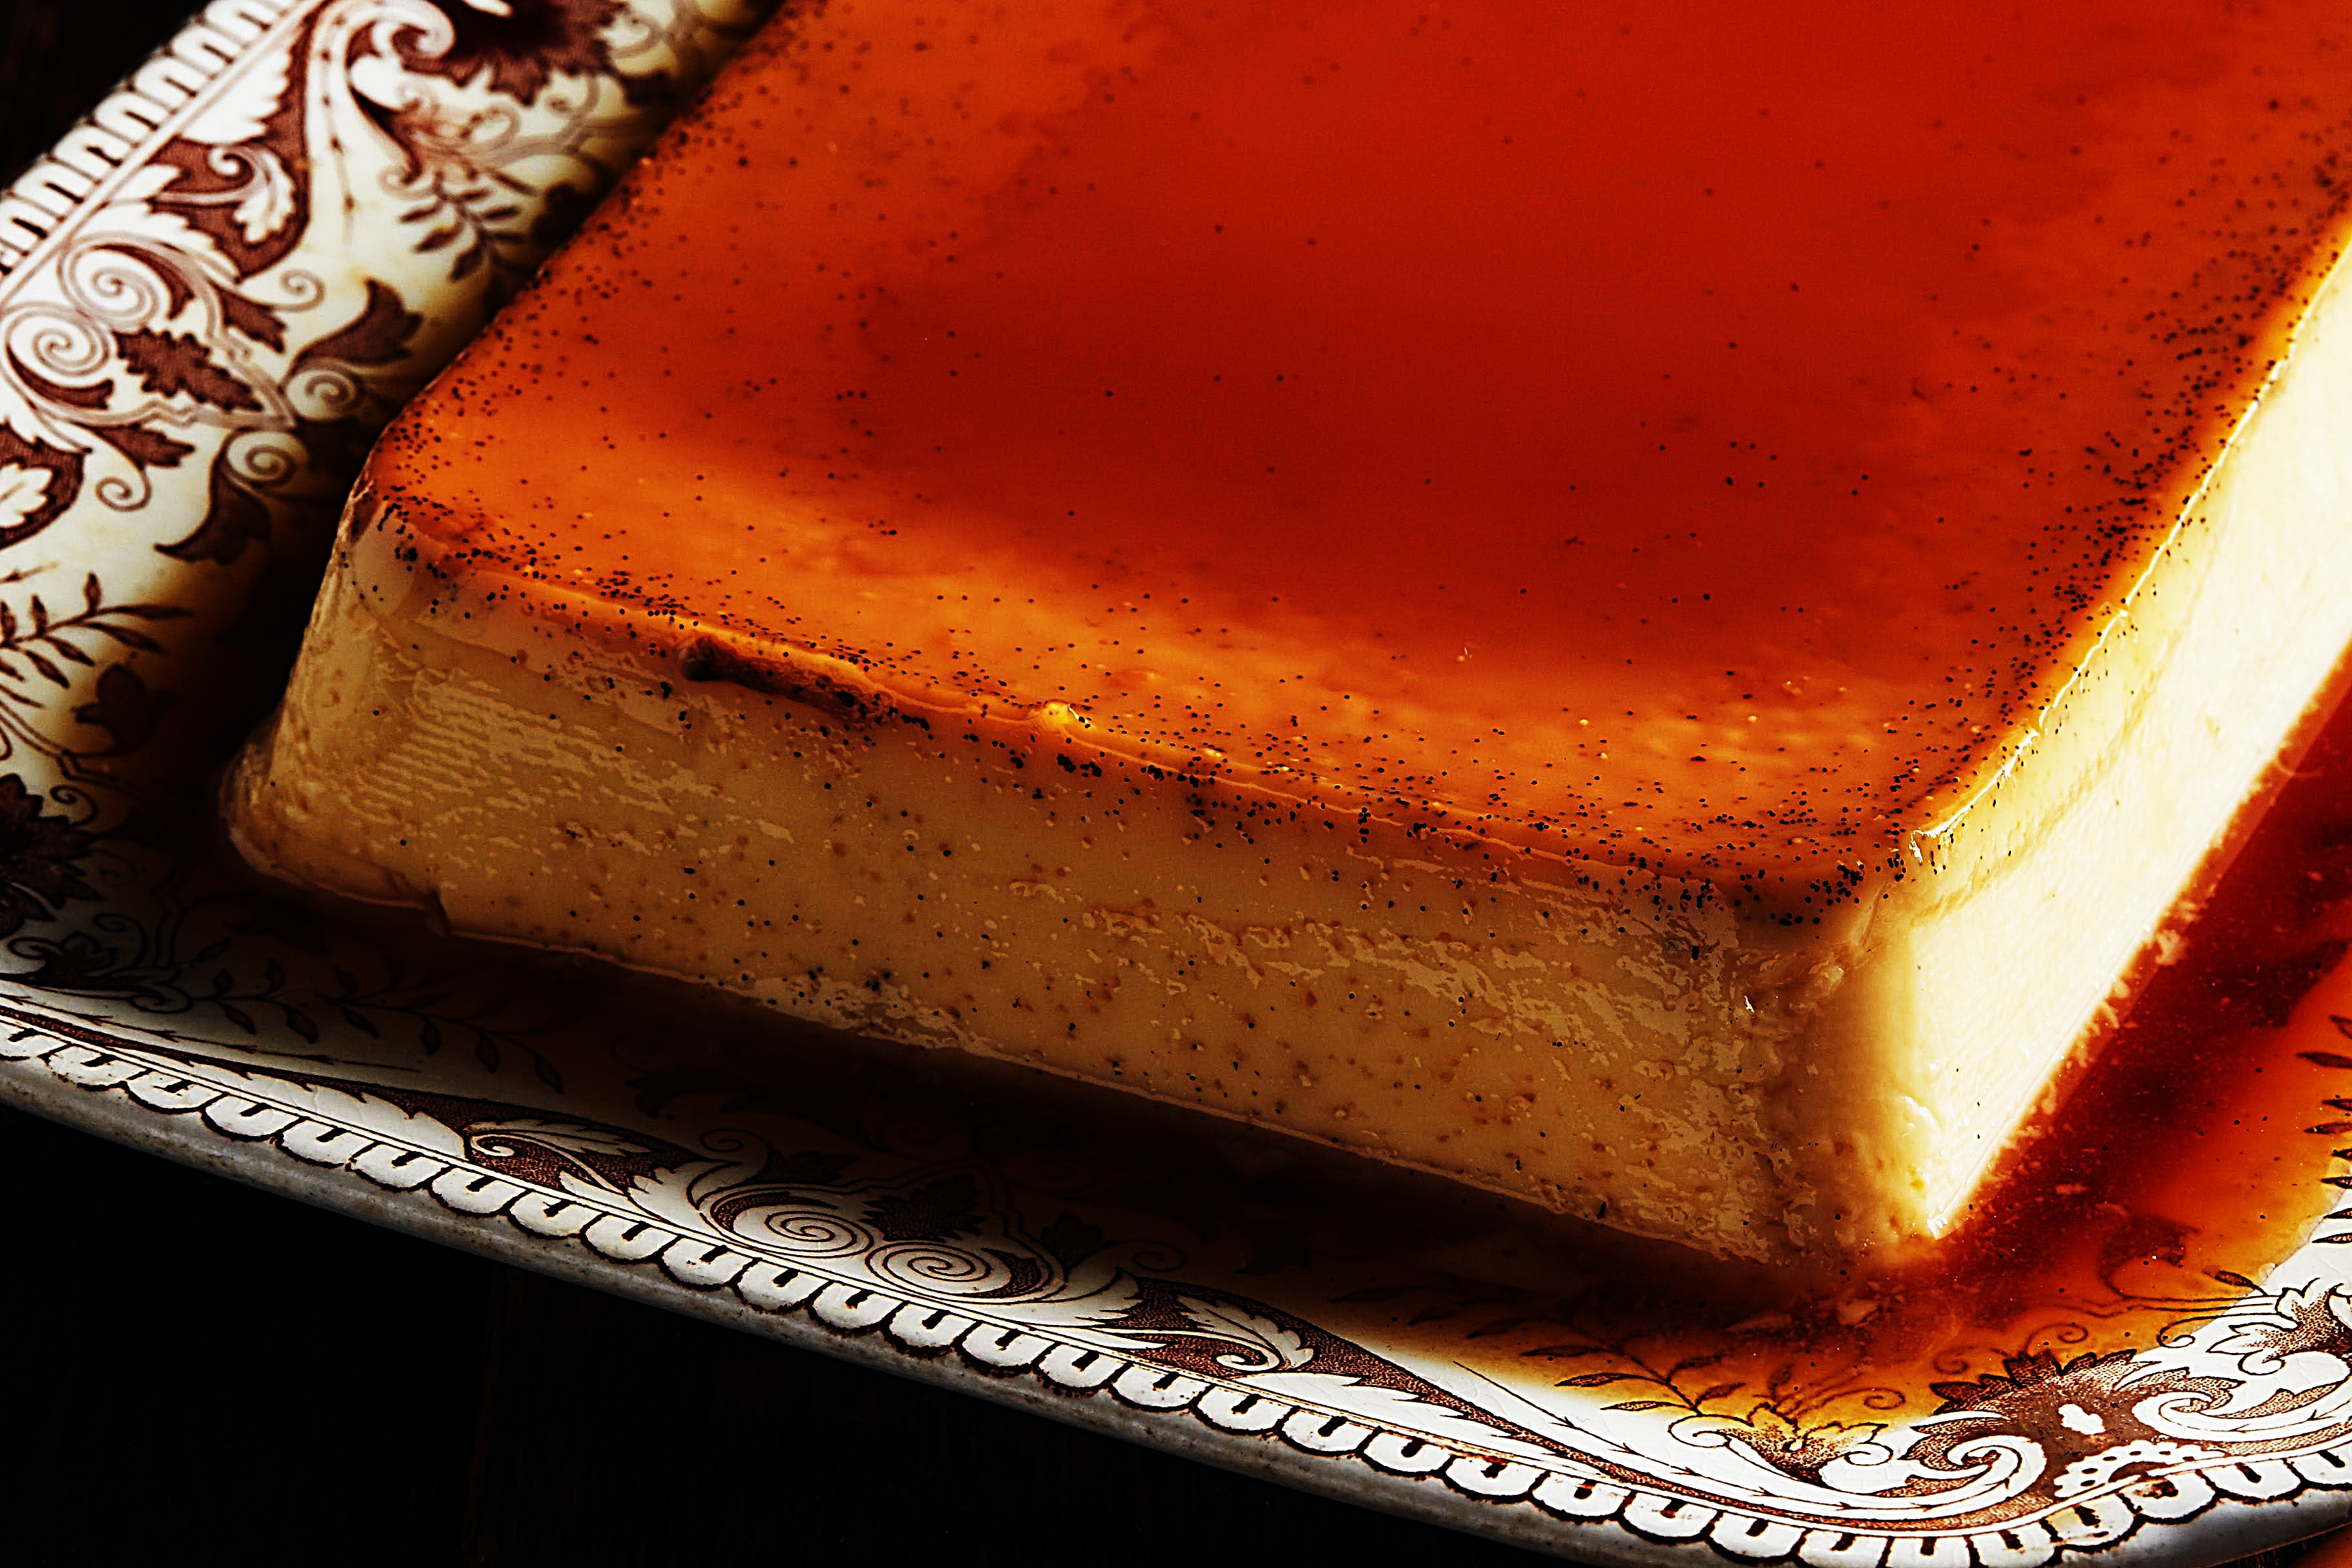 Stupid-Easy Recipe for Classic Mexican Flan (#1 Top-Rated)